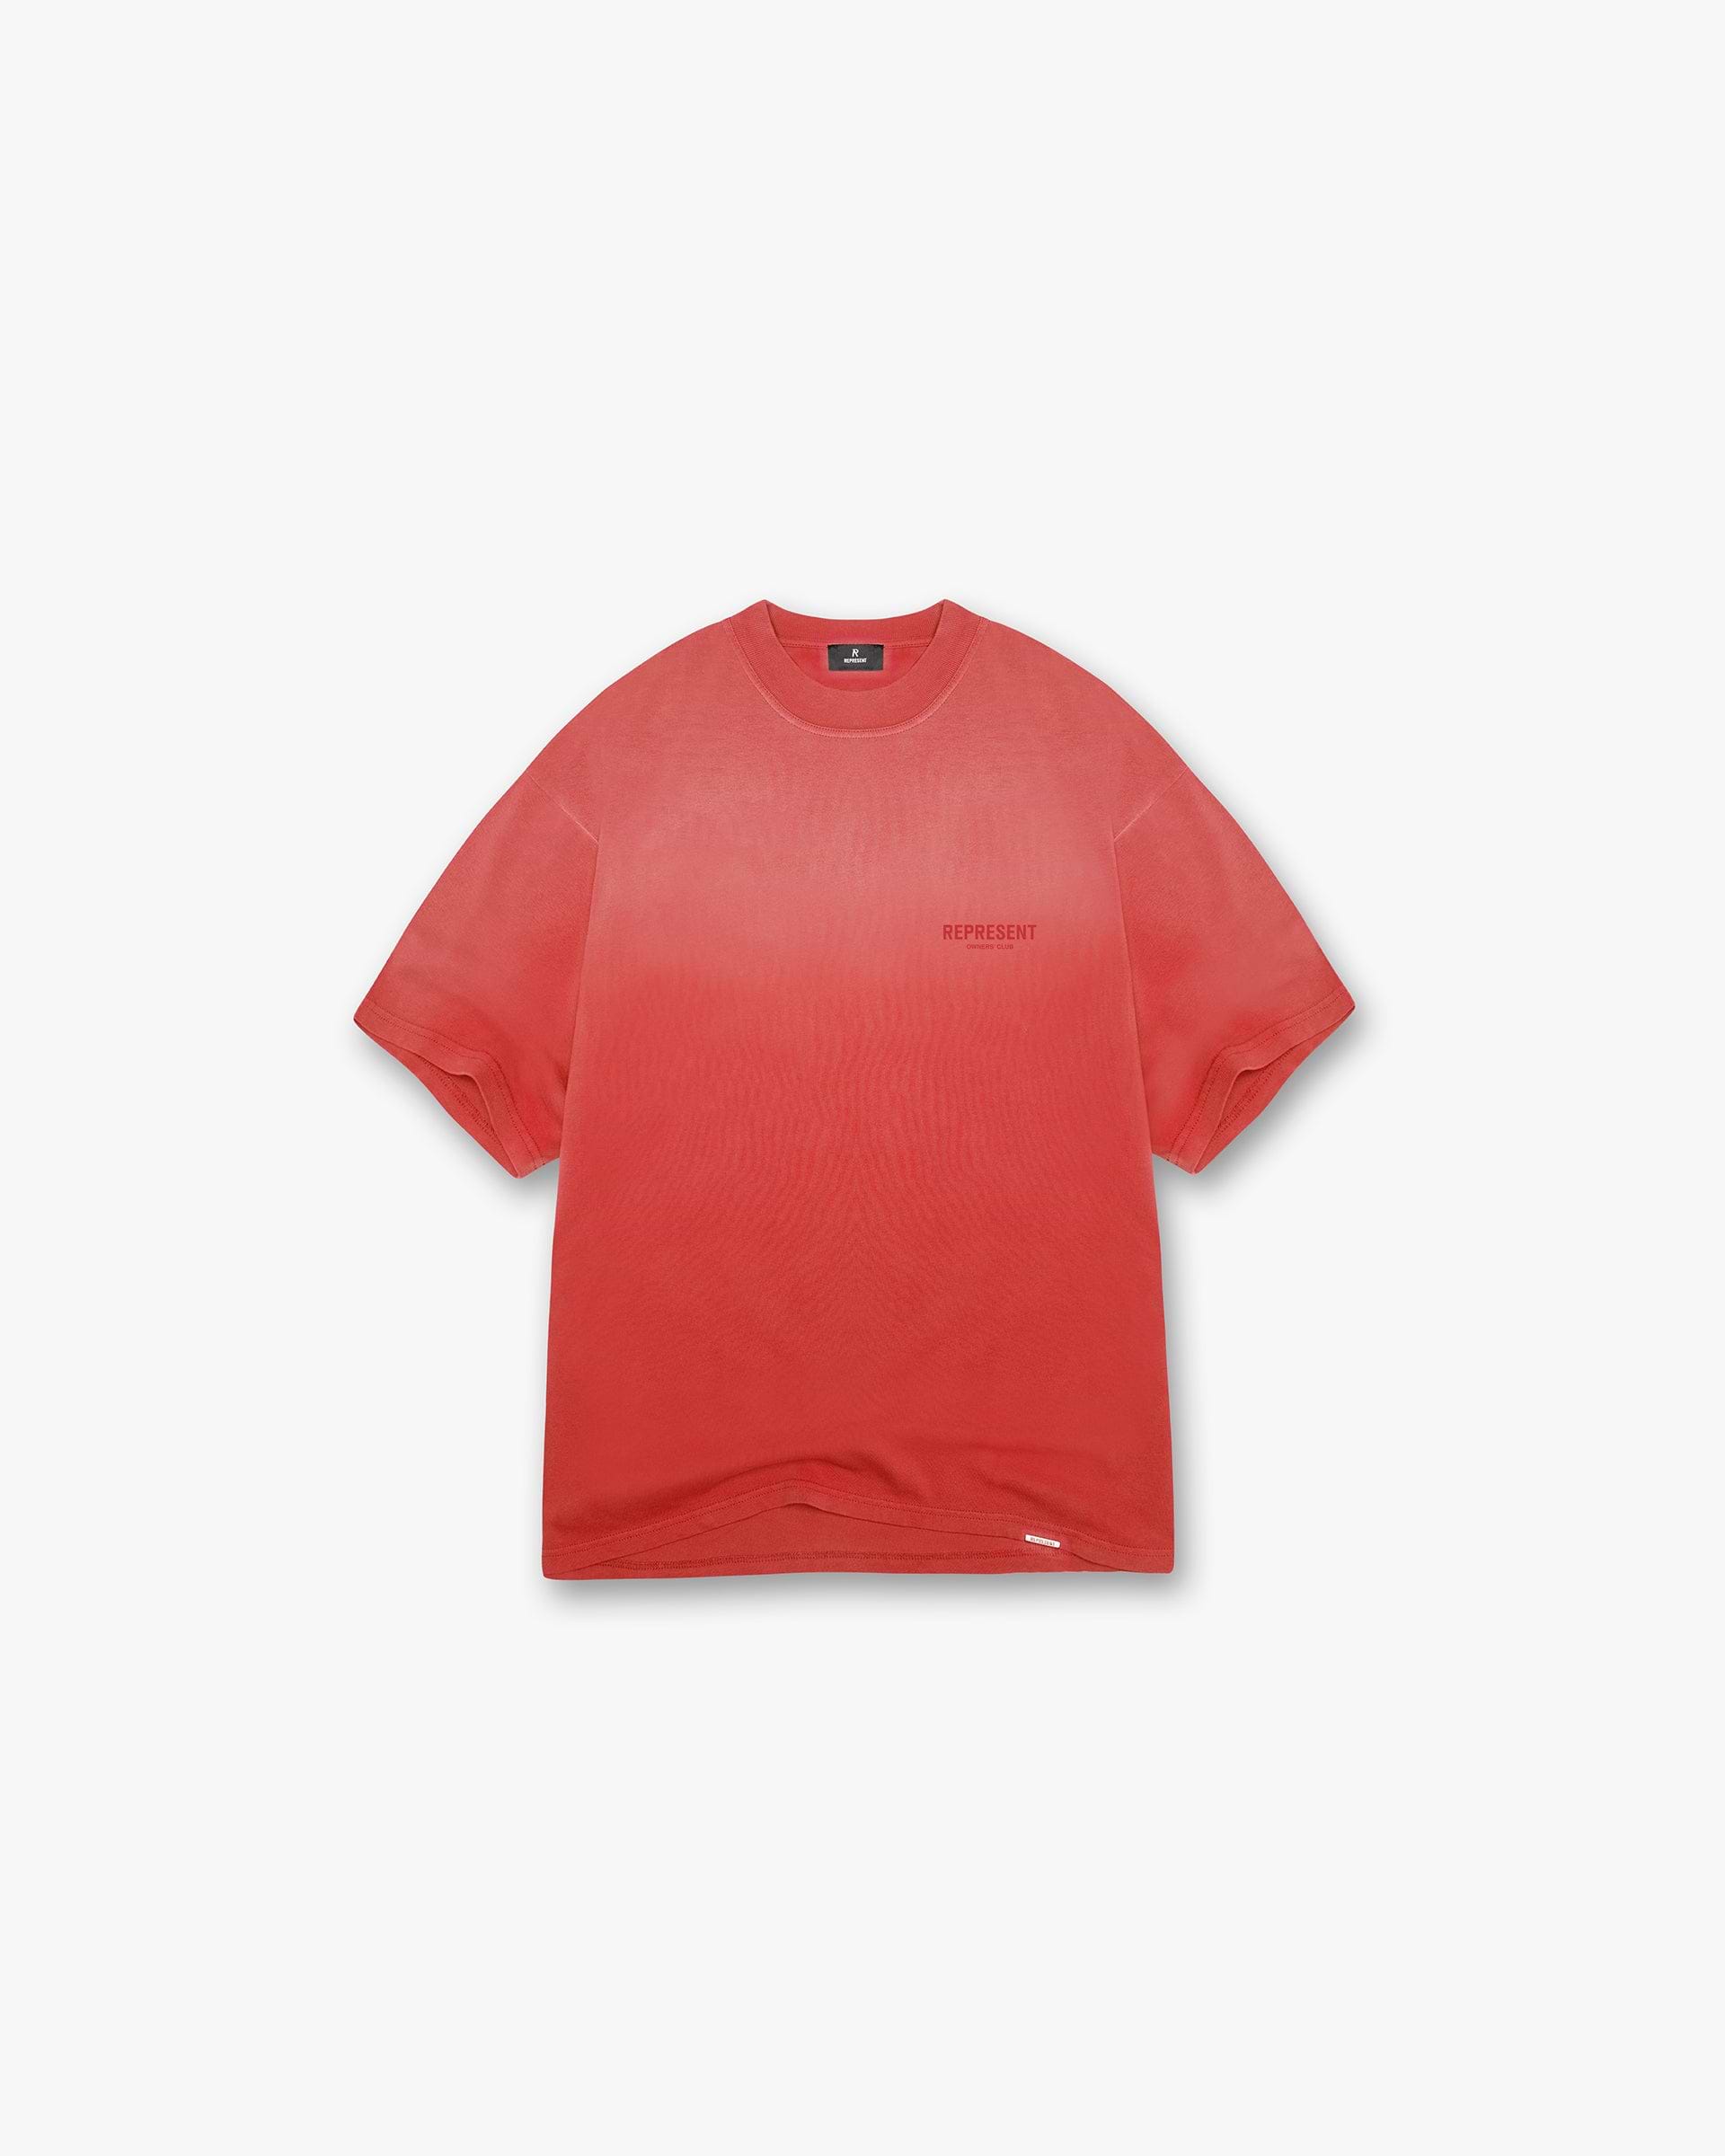 Represent Owners Club T-Shirt - Barbados Cherry